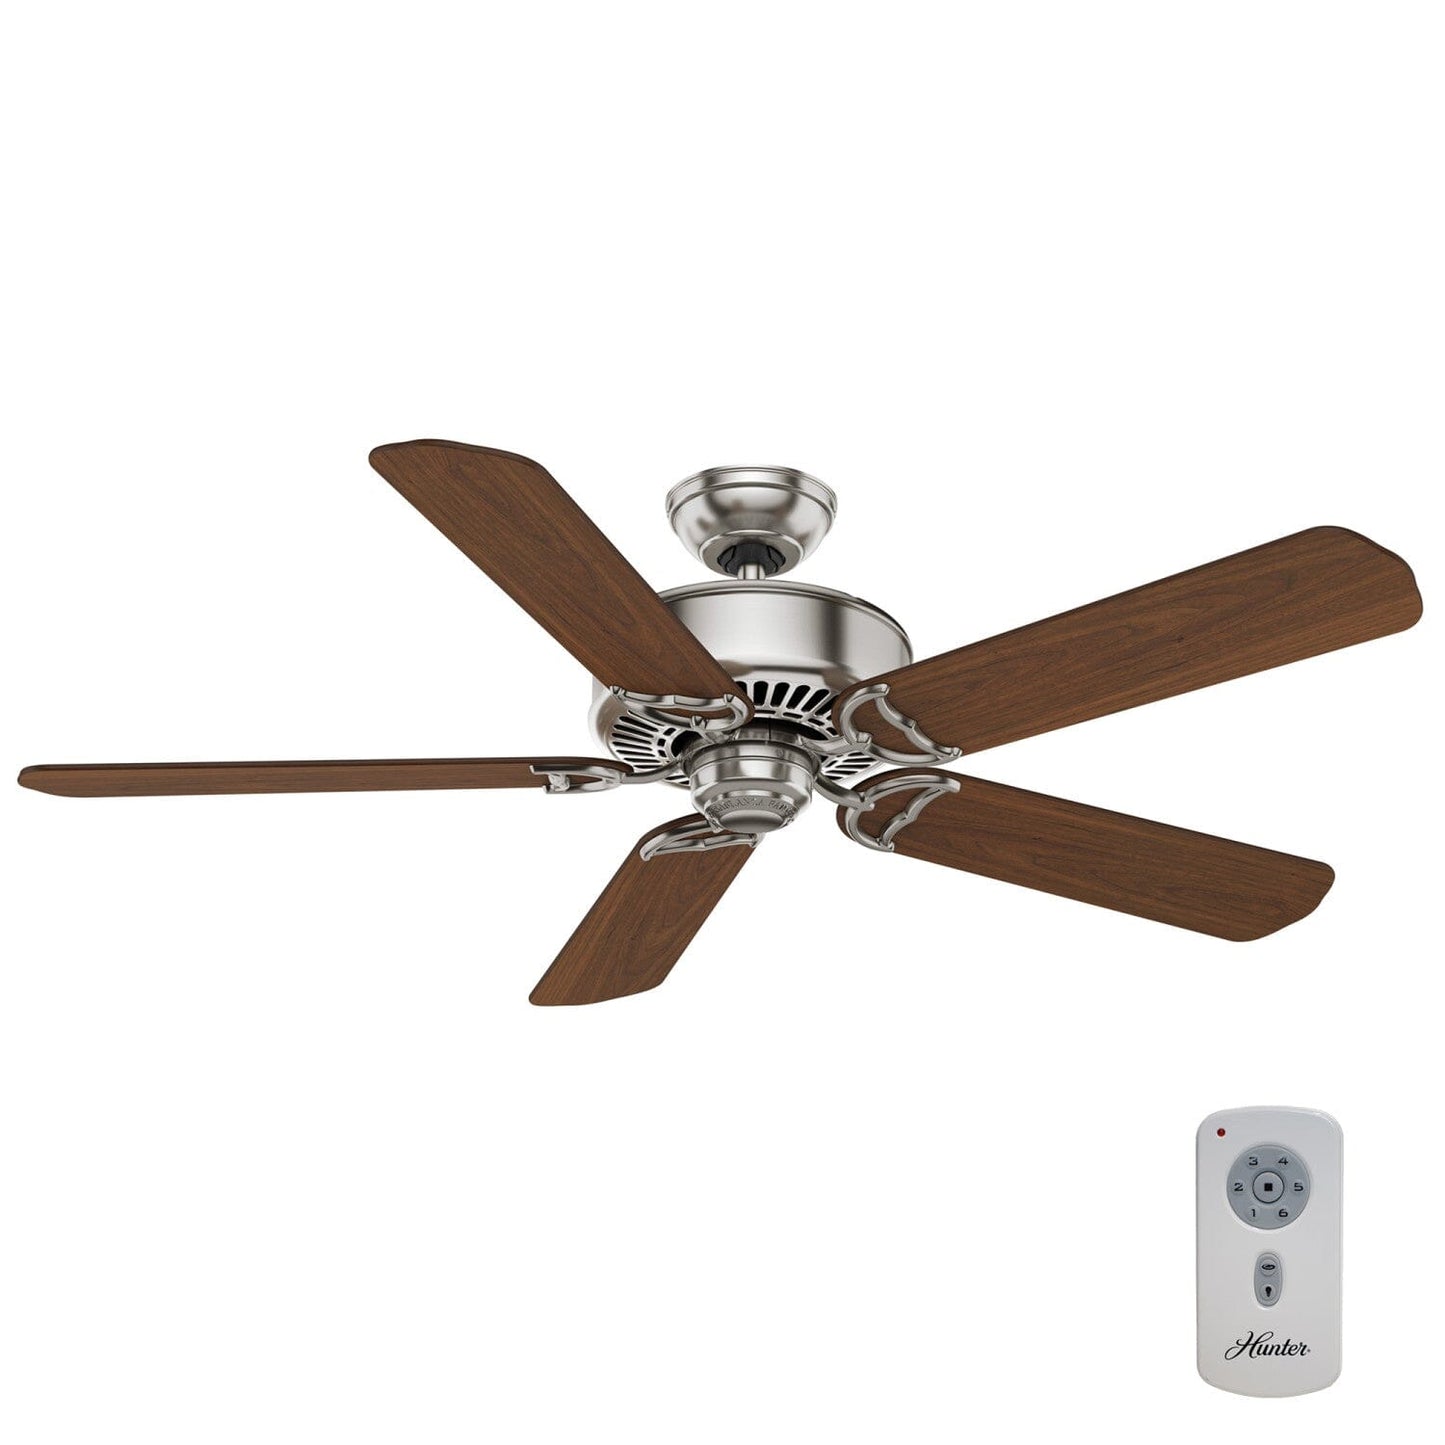 Panama ENERGY STAR DC 54 inch with Remote Ceiling Fans Casablanca 